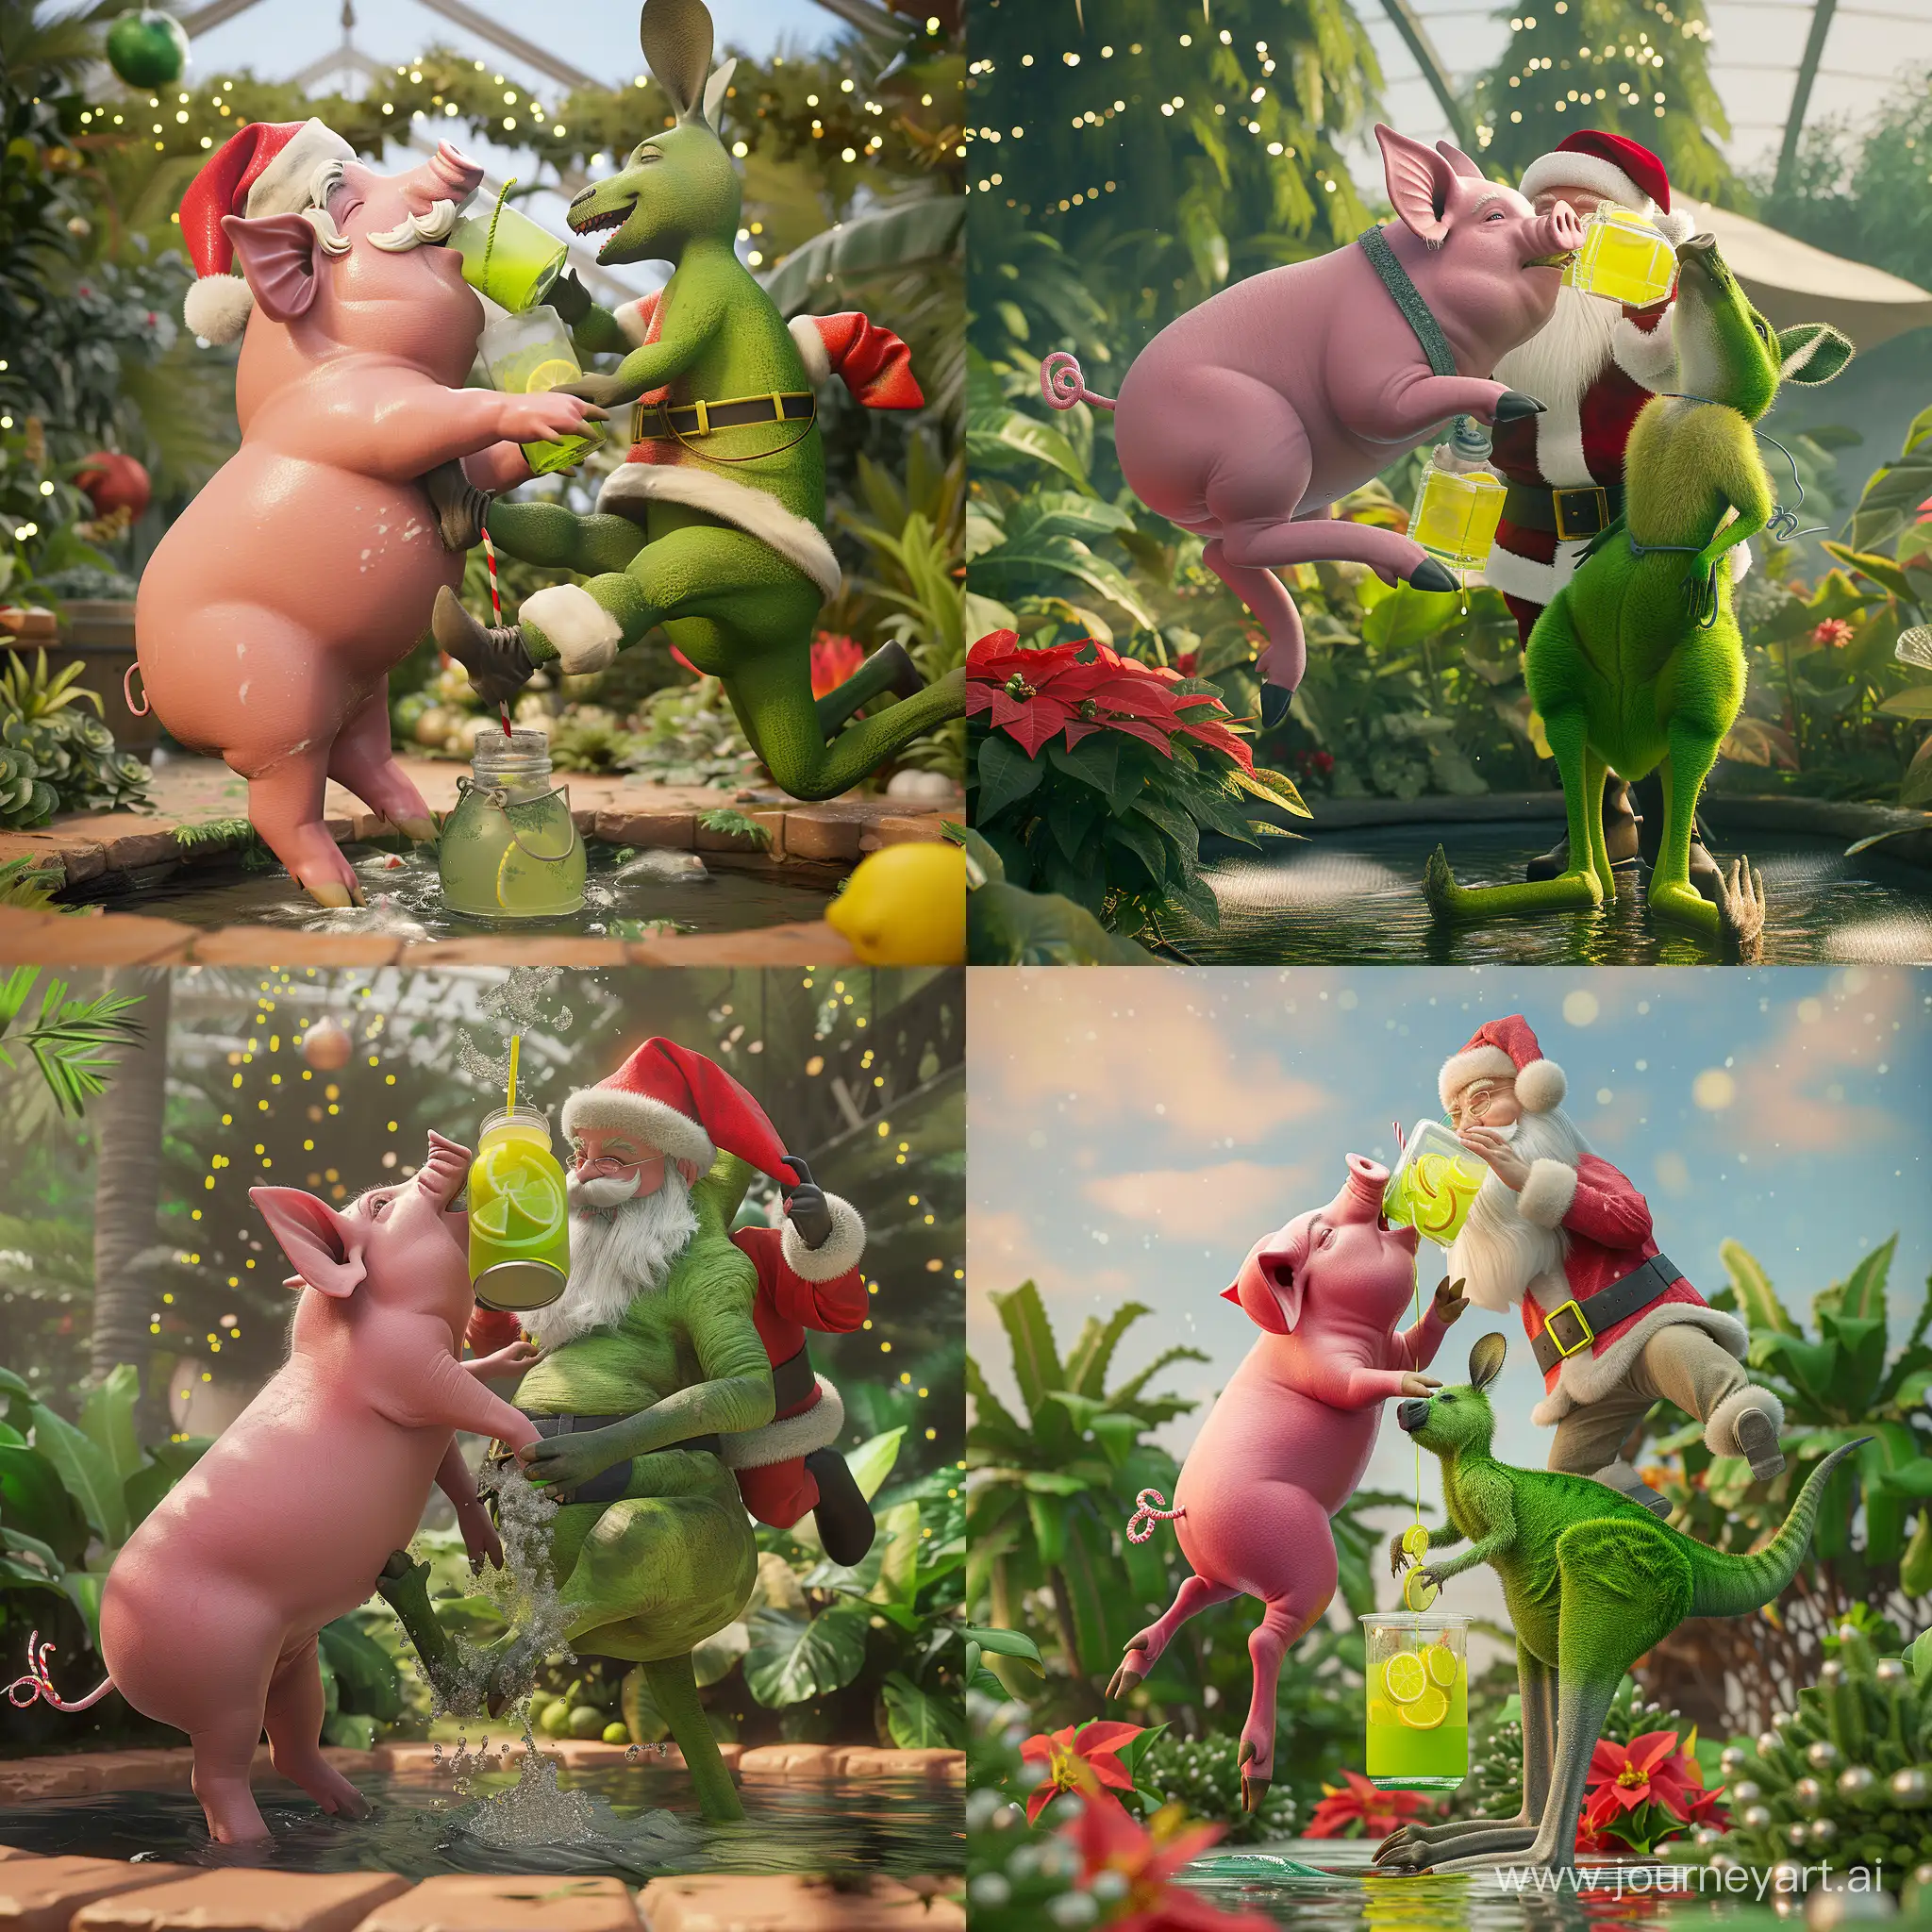 The Botanical Garden. A pink pig kisses a green kangaroo. and Santa Claus jumps on them and pours lemonade clamped between his legs. 8k ultra realism. unreal engine